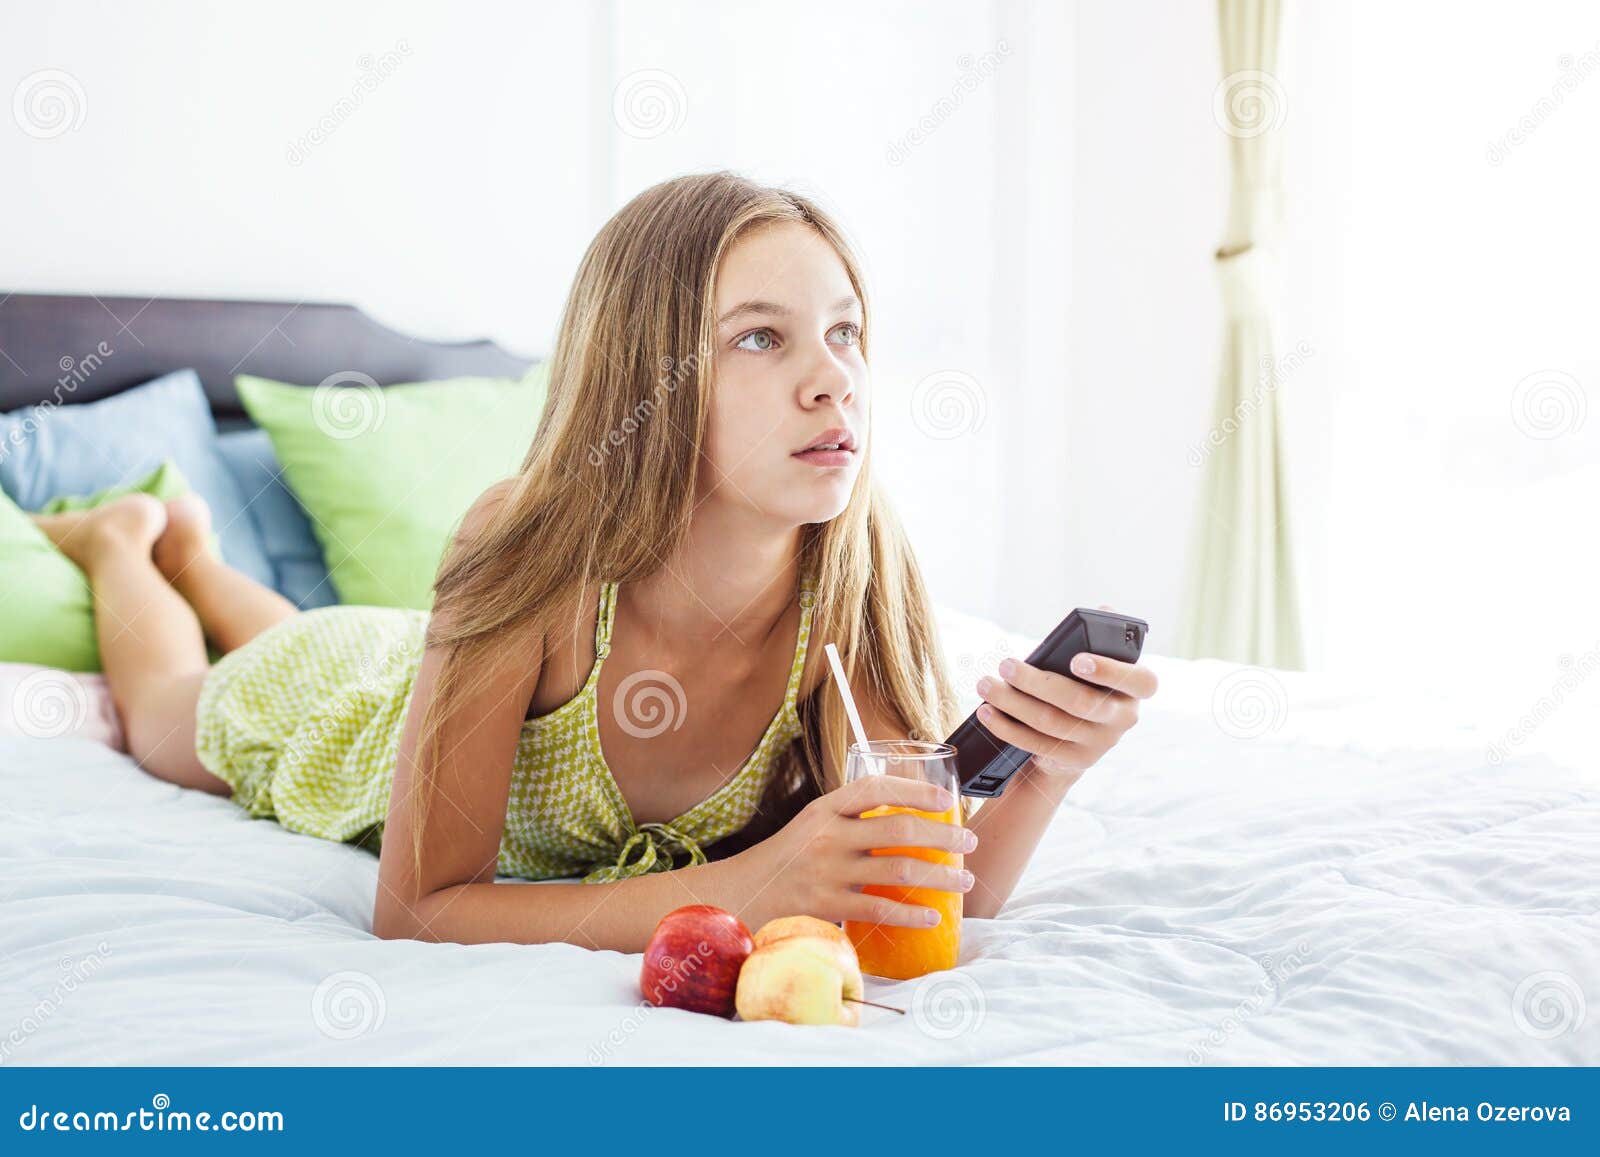 Girl Drinking Juice And Watching  Tv  In Bedroom Stock Photo Image of lifestyle healthy 86953206